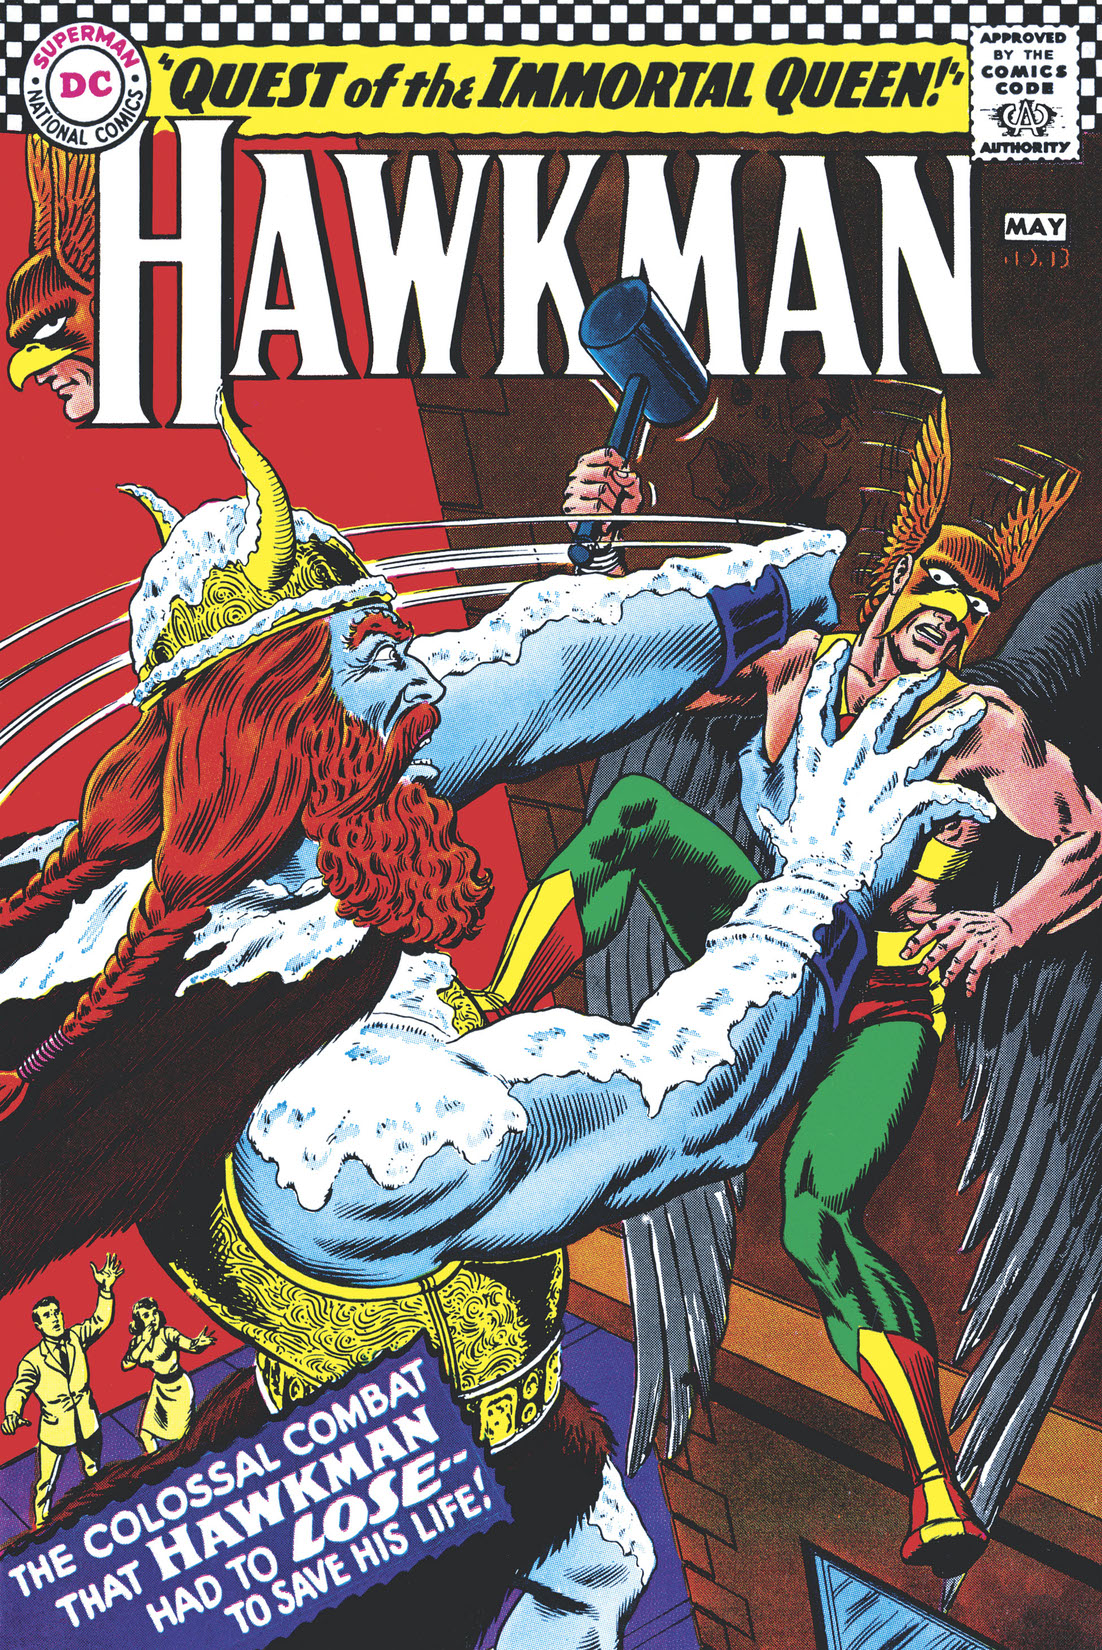 Hawkman (1964-) #13 preview images